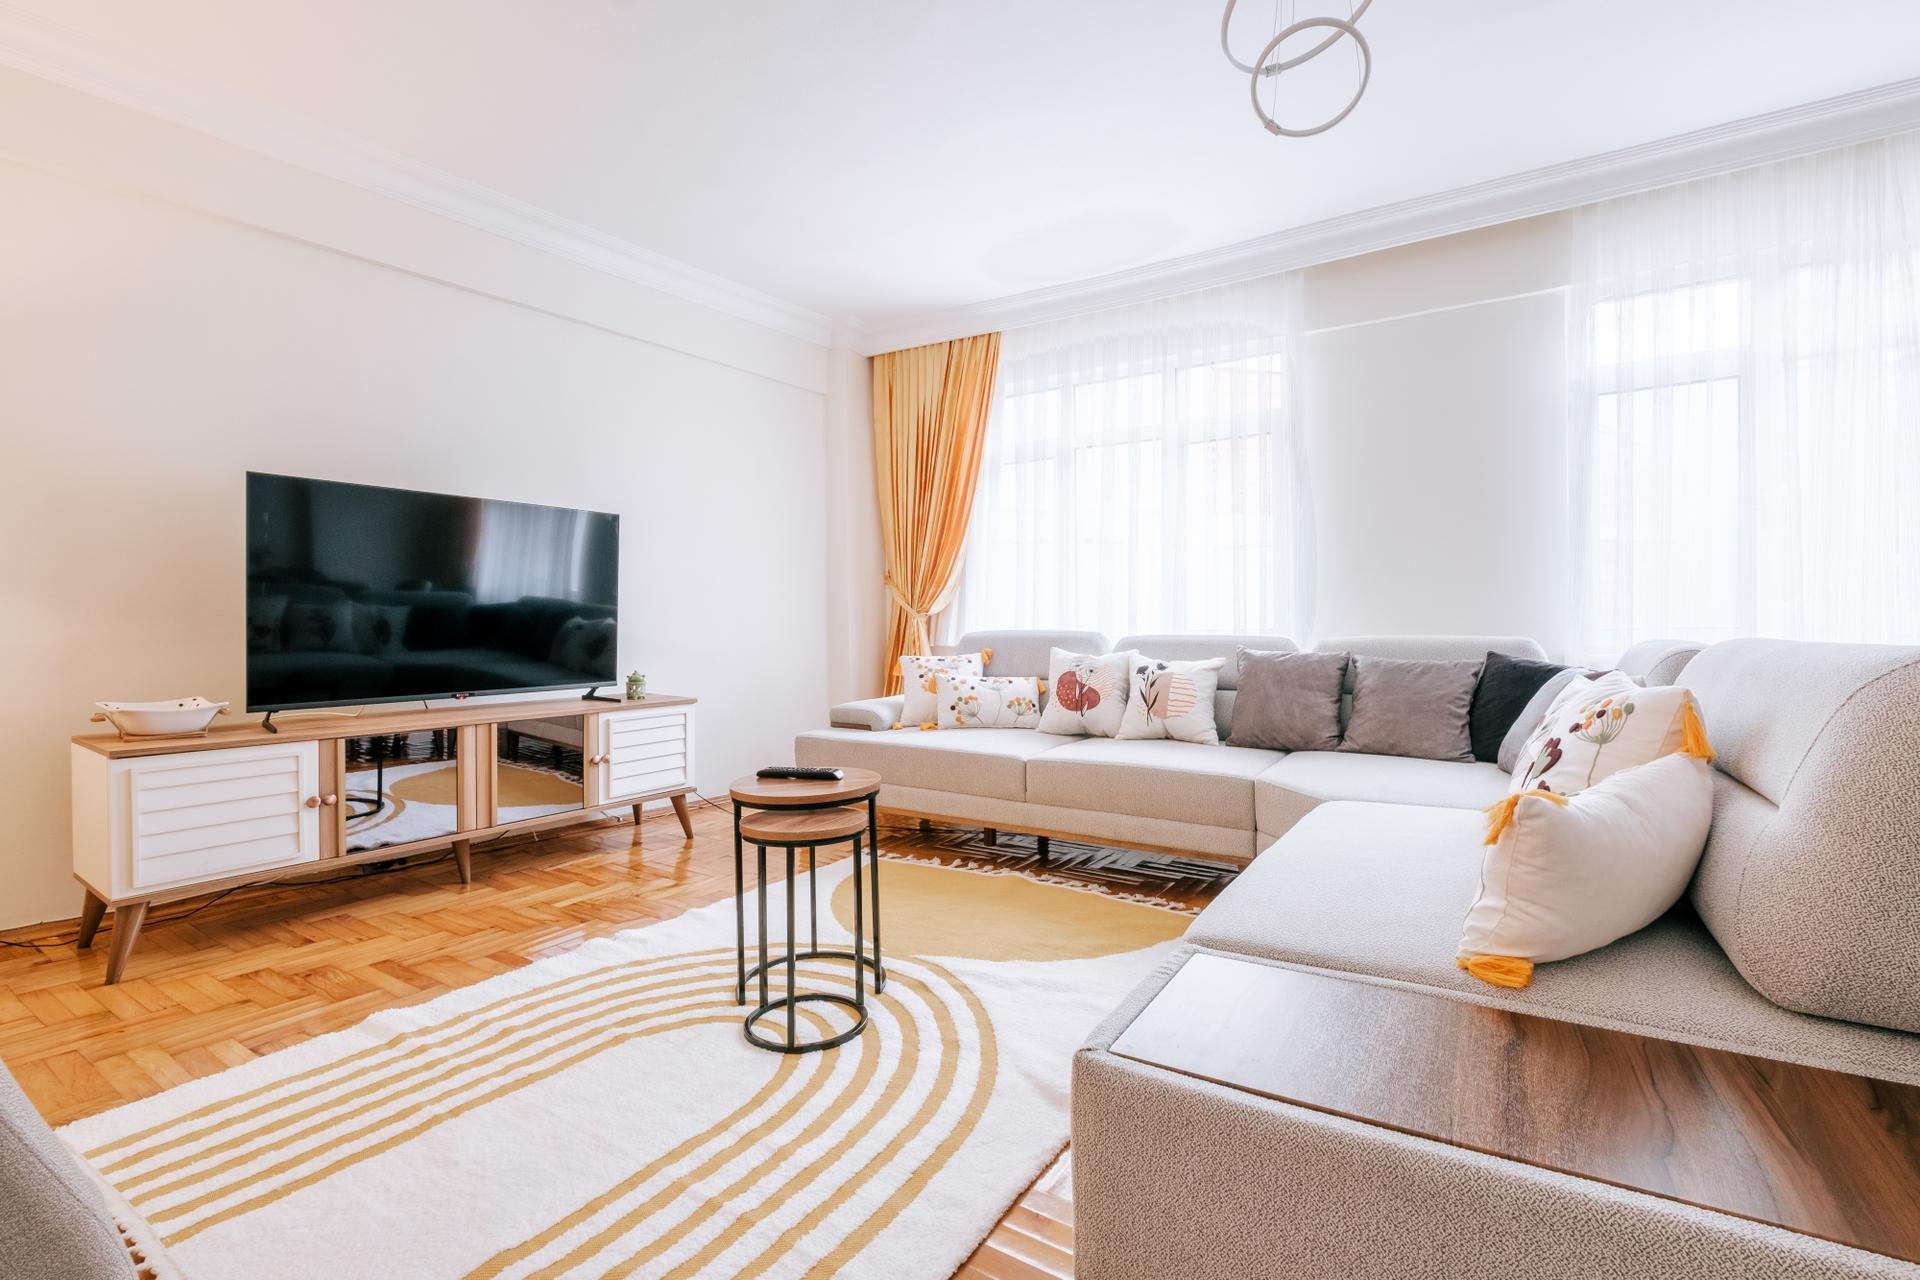 A spacious, peaceful, and comfortable place to stay in the center of Istanbul!